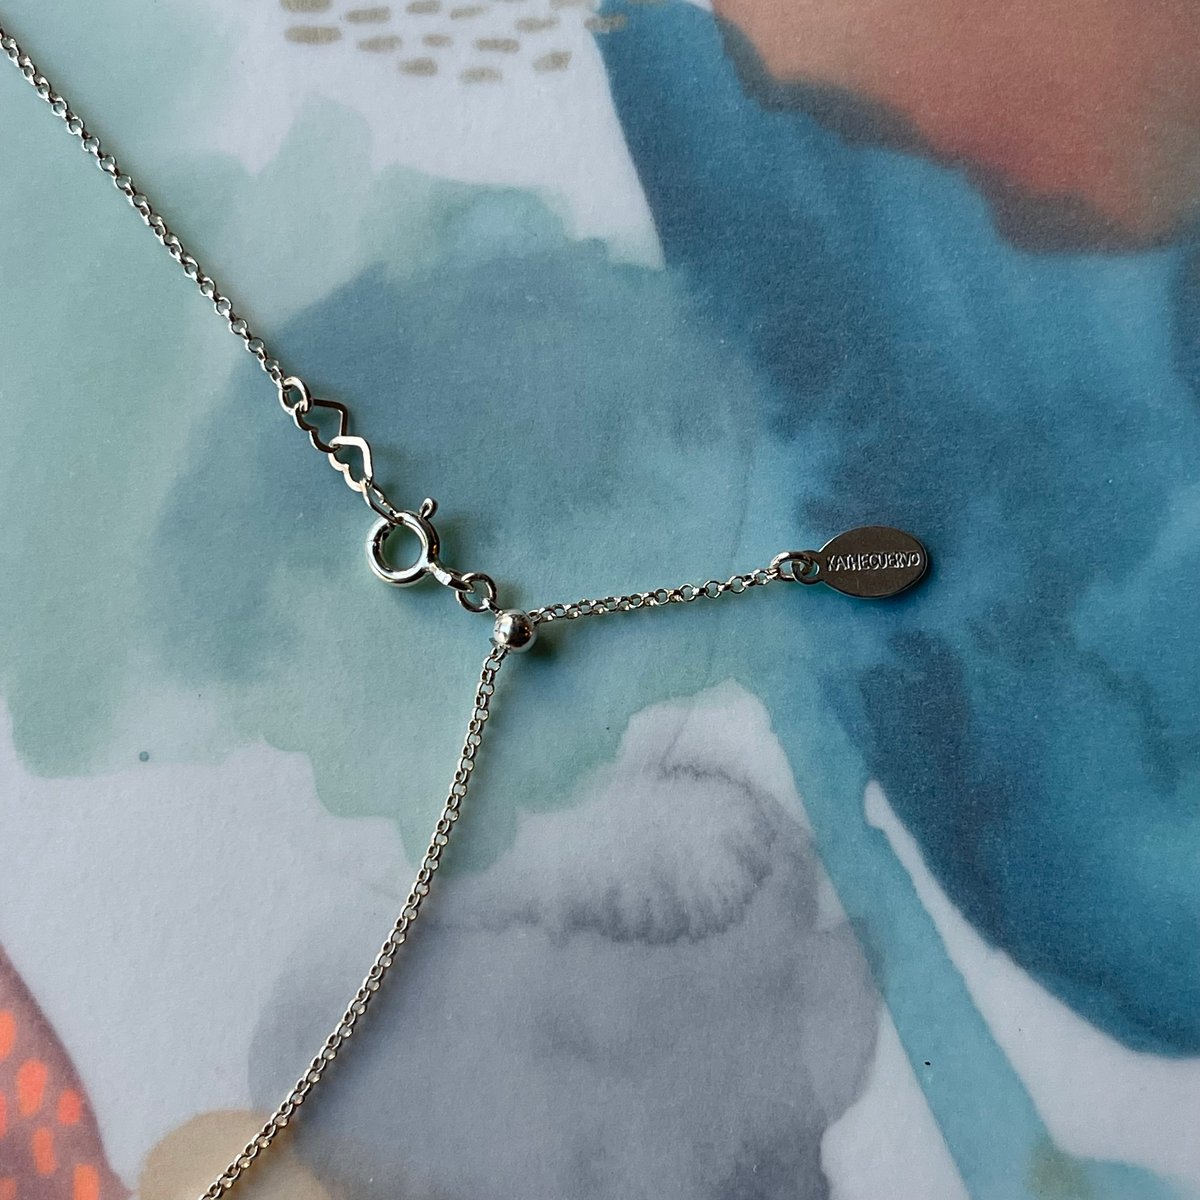 Image of dainty chain and gemstones necklace